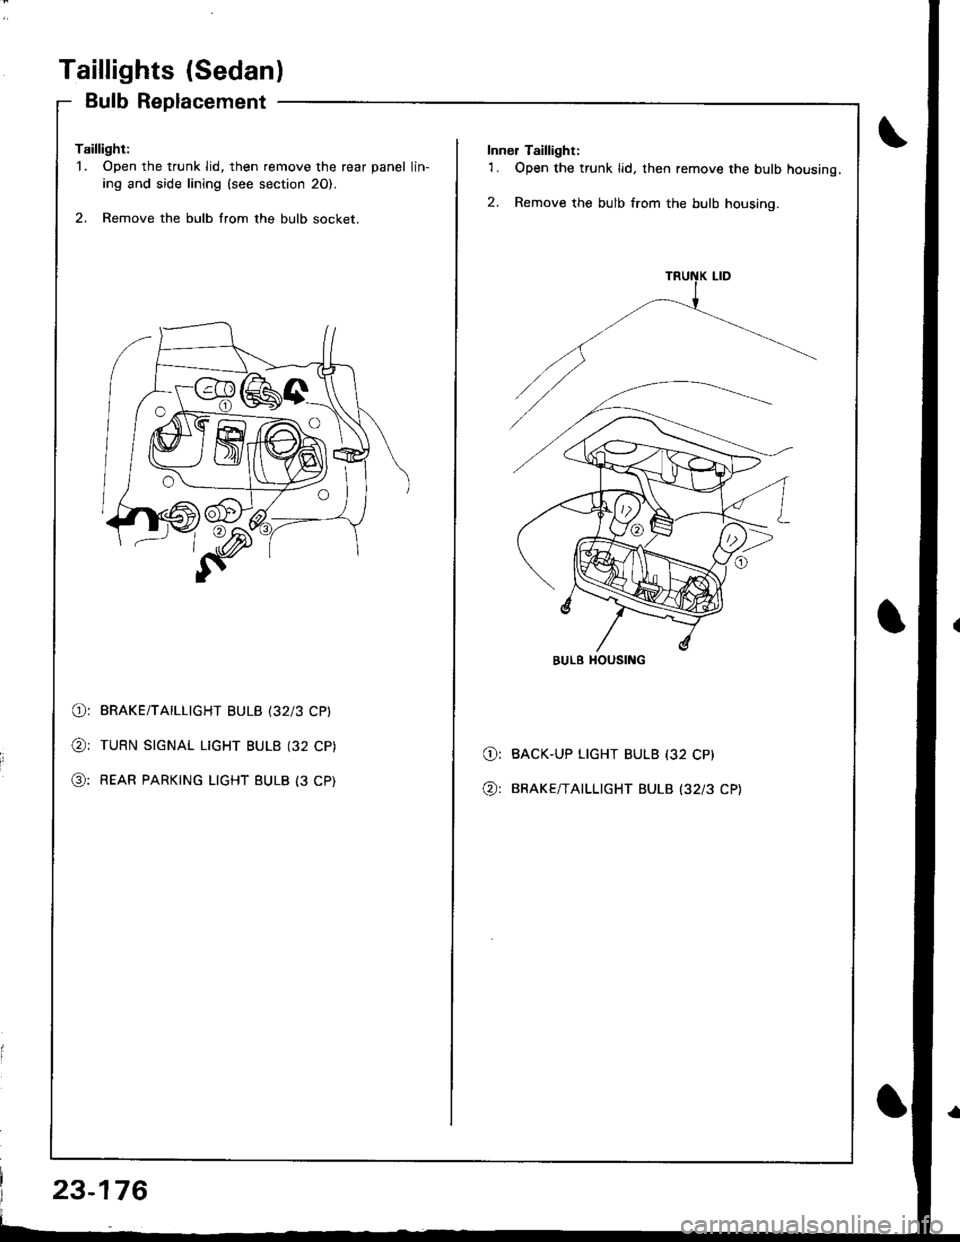 HONDA INTEGRA 1998 4.G Workshop Manual Taillights (Sedanl
Bulb Replacement
Taillight:1. Open the trunk lid, then remove the rear panel lin-
ing and side lining (see section 20).
2. Remove the bulb from the bulb socket.
O: BRAKE/TAILLIGHT 